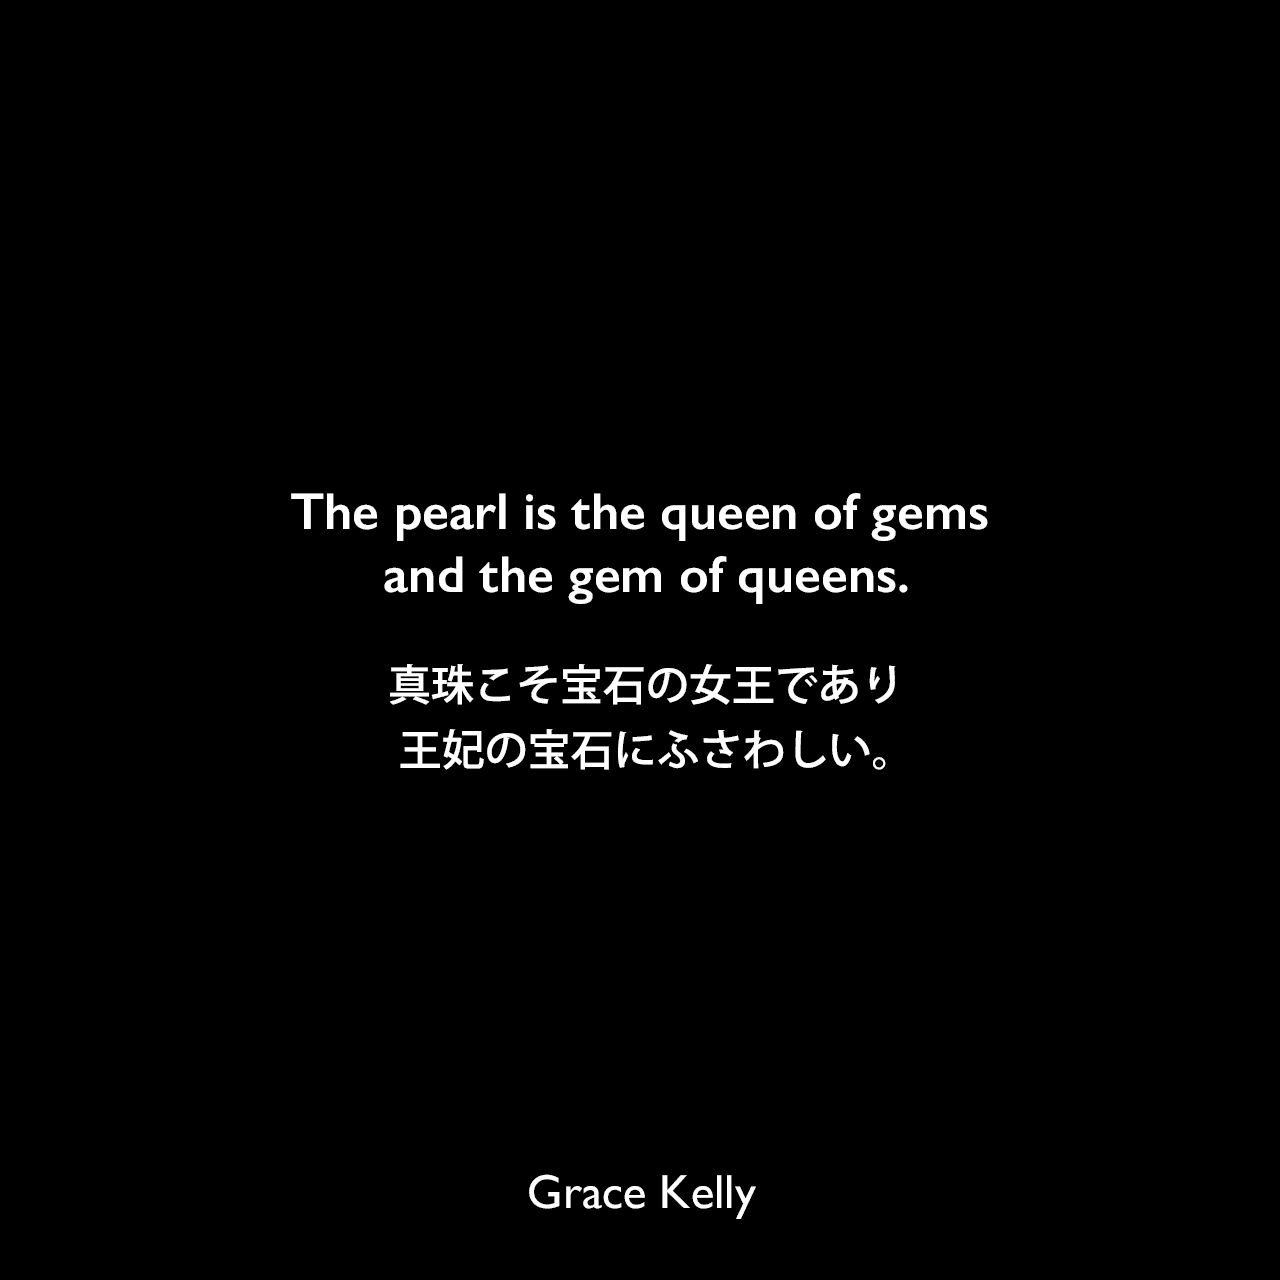 The pearl is the queen of gems and the gem of queens.真珠こそ宝石の女王であり、王妃の宝石にふさわしい。Grace Kelly